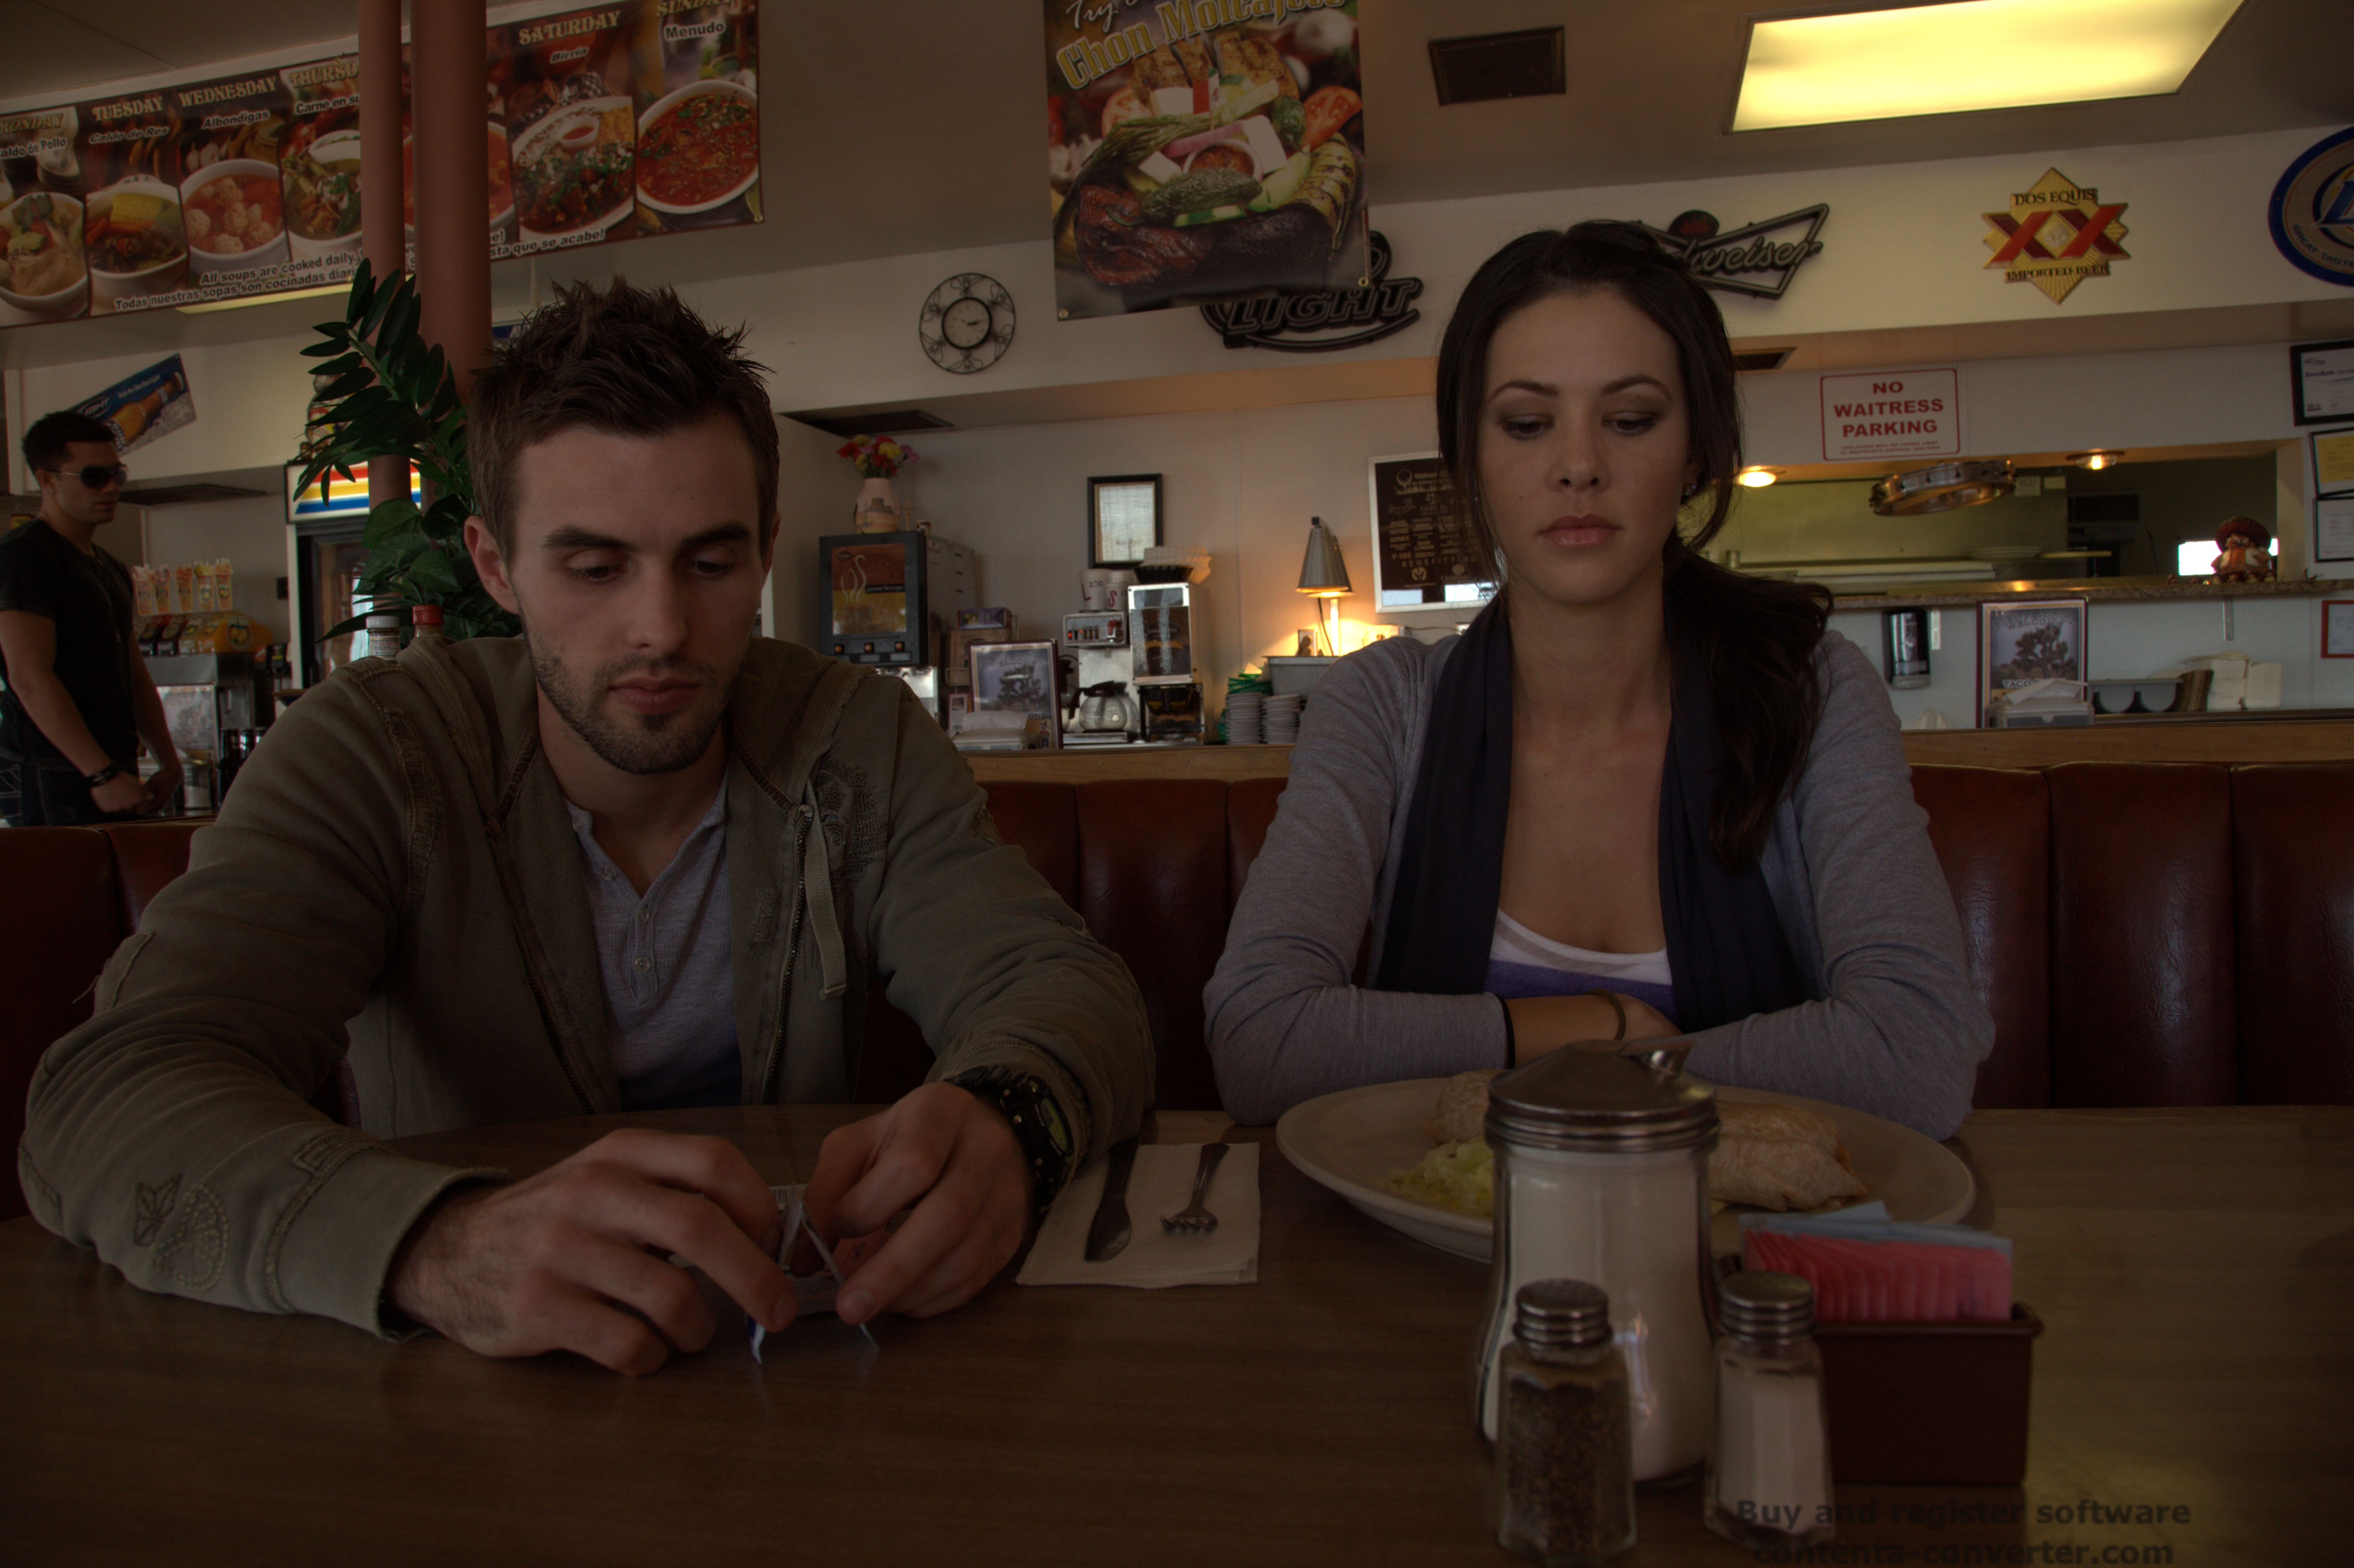 Still of Nicole Sienna and Josh Cole on the set of Stripped